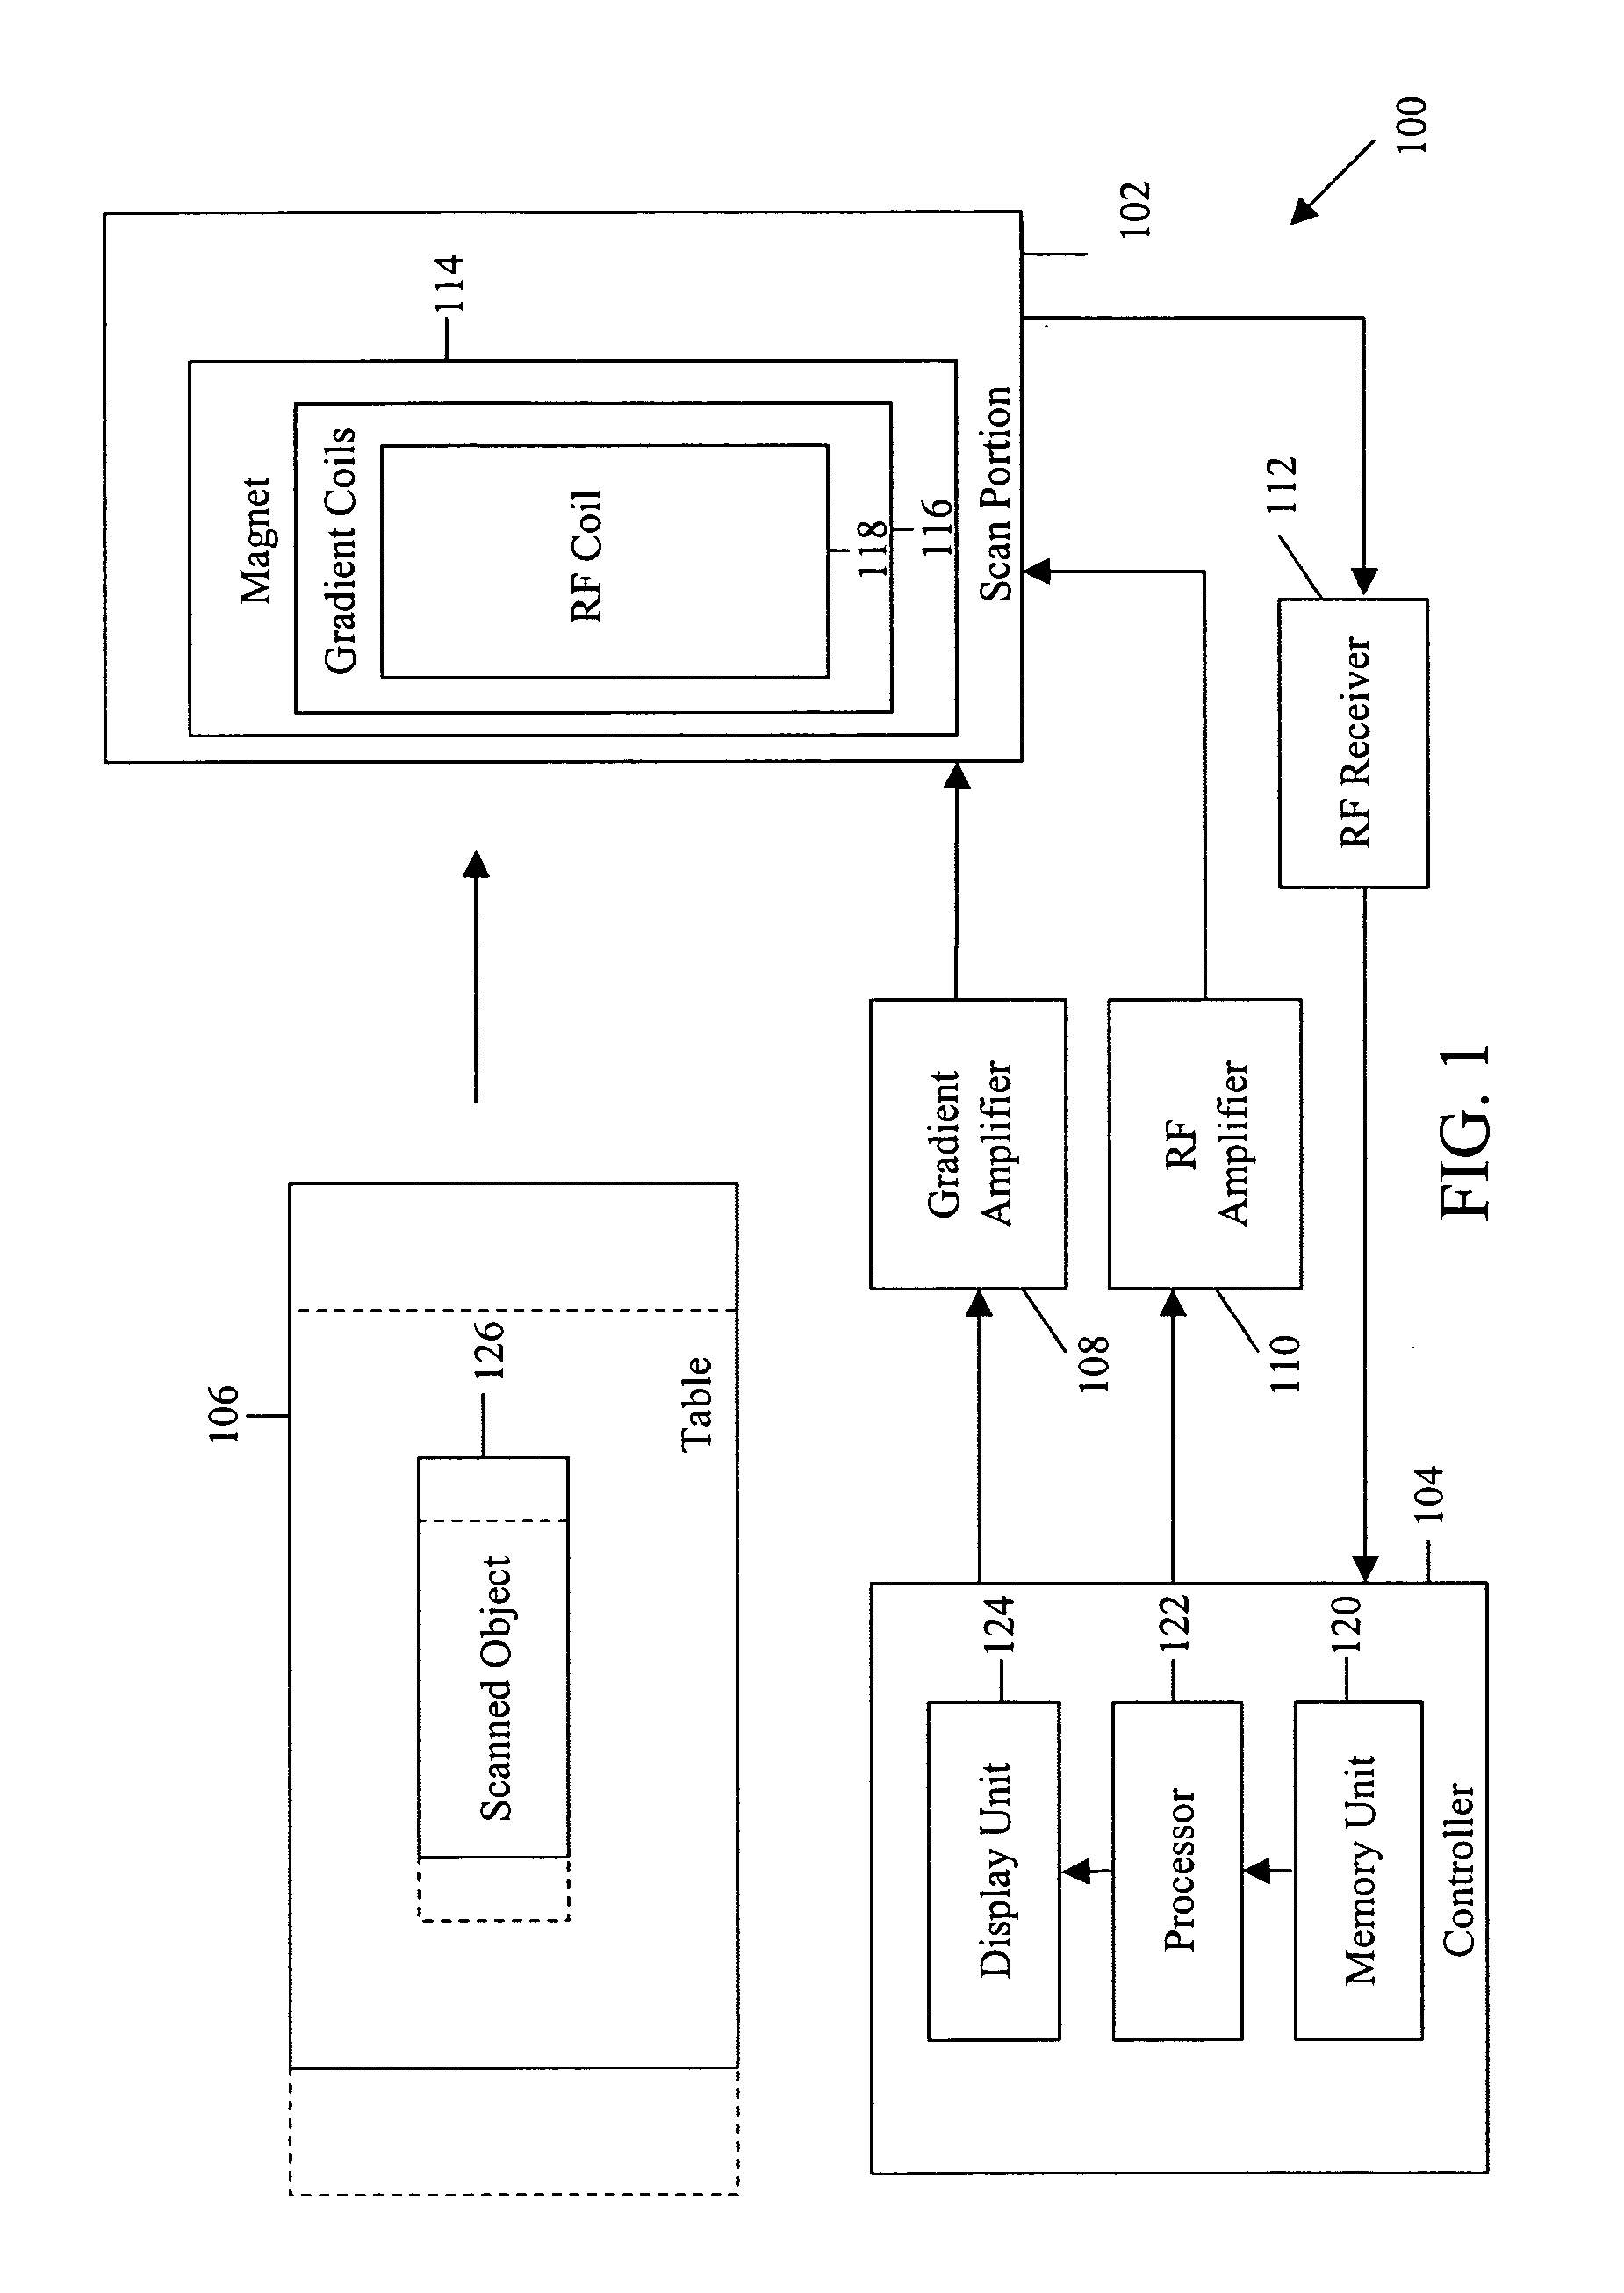 Method for generating T1-weighted magnetic resonance images and quantitative T1 maps